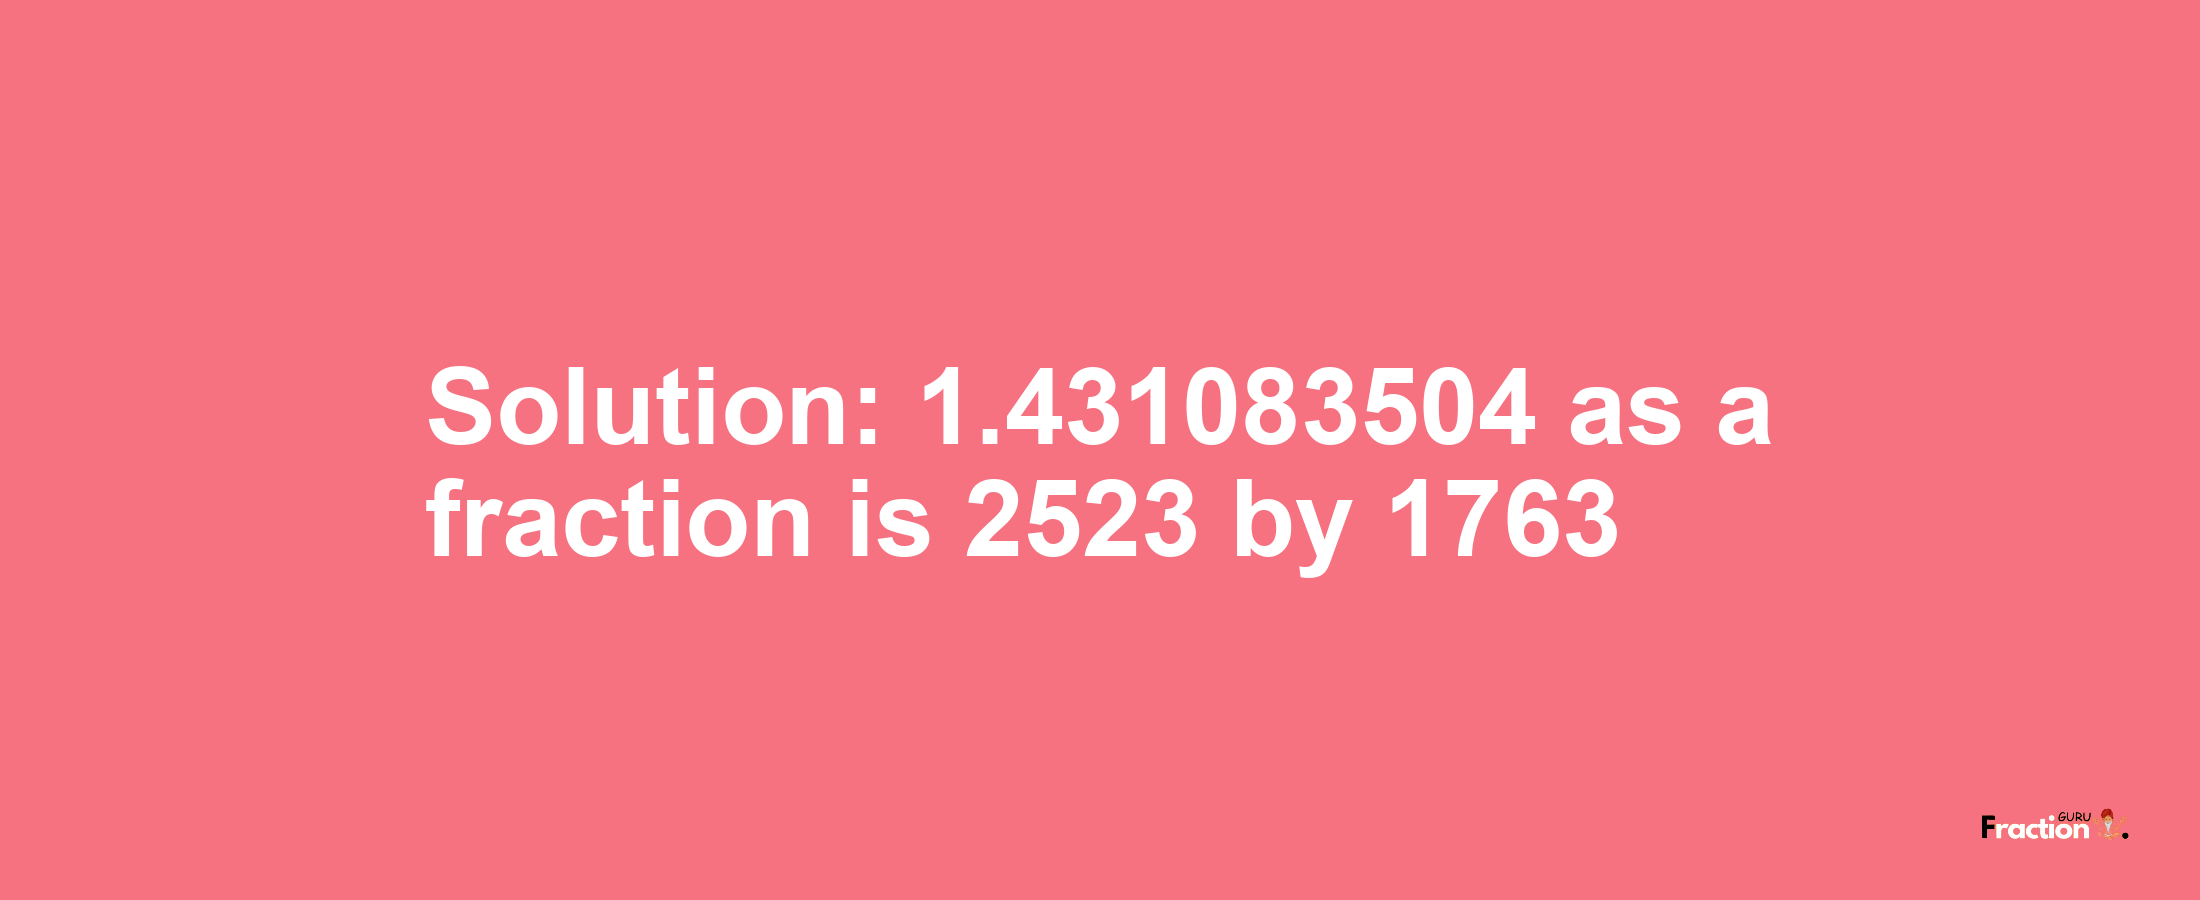 Solution:1.431083504 as a fraction is 2523/1763